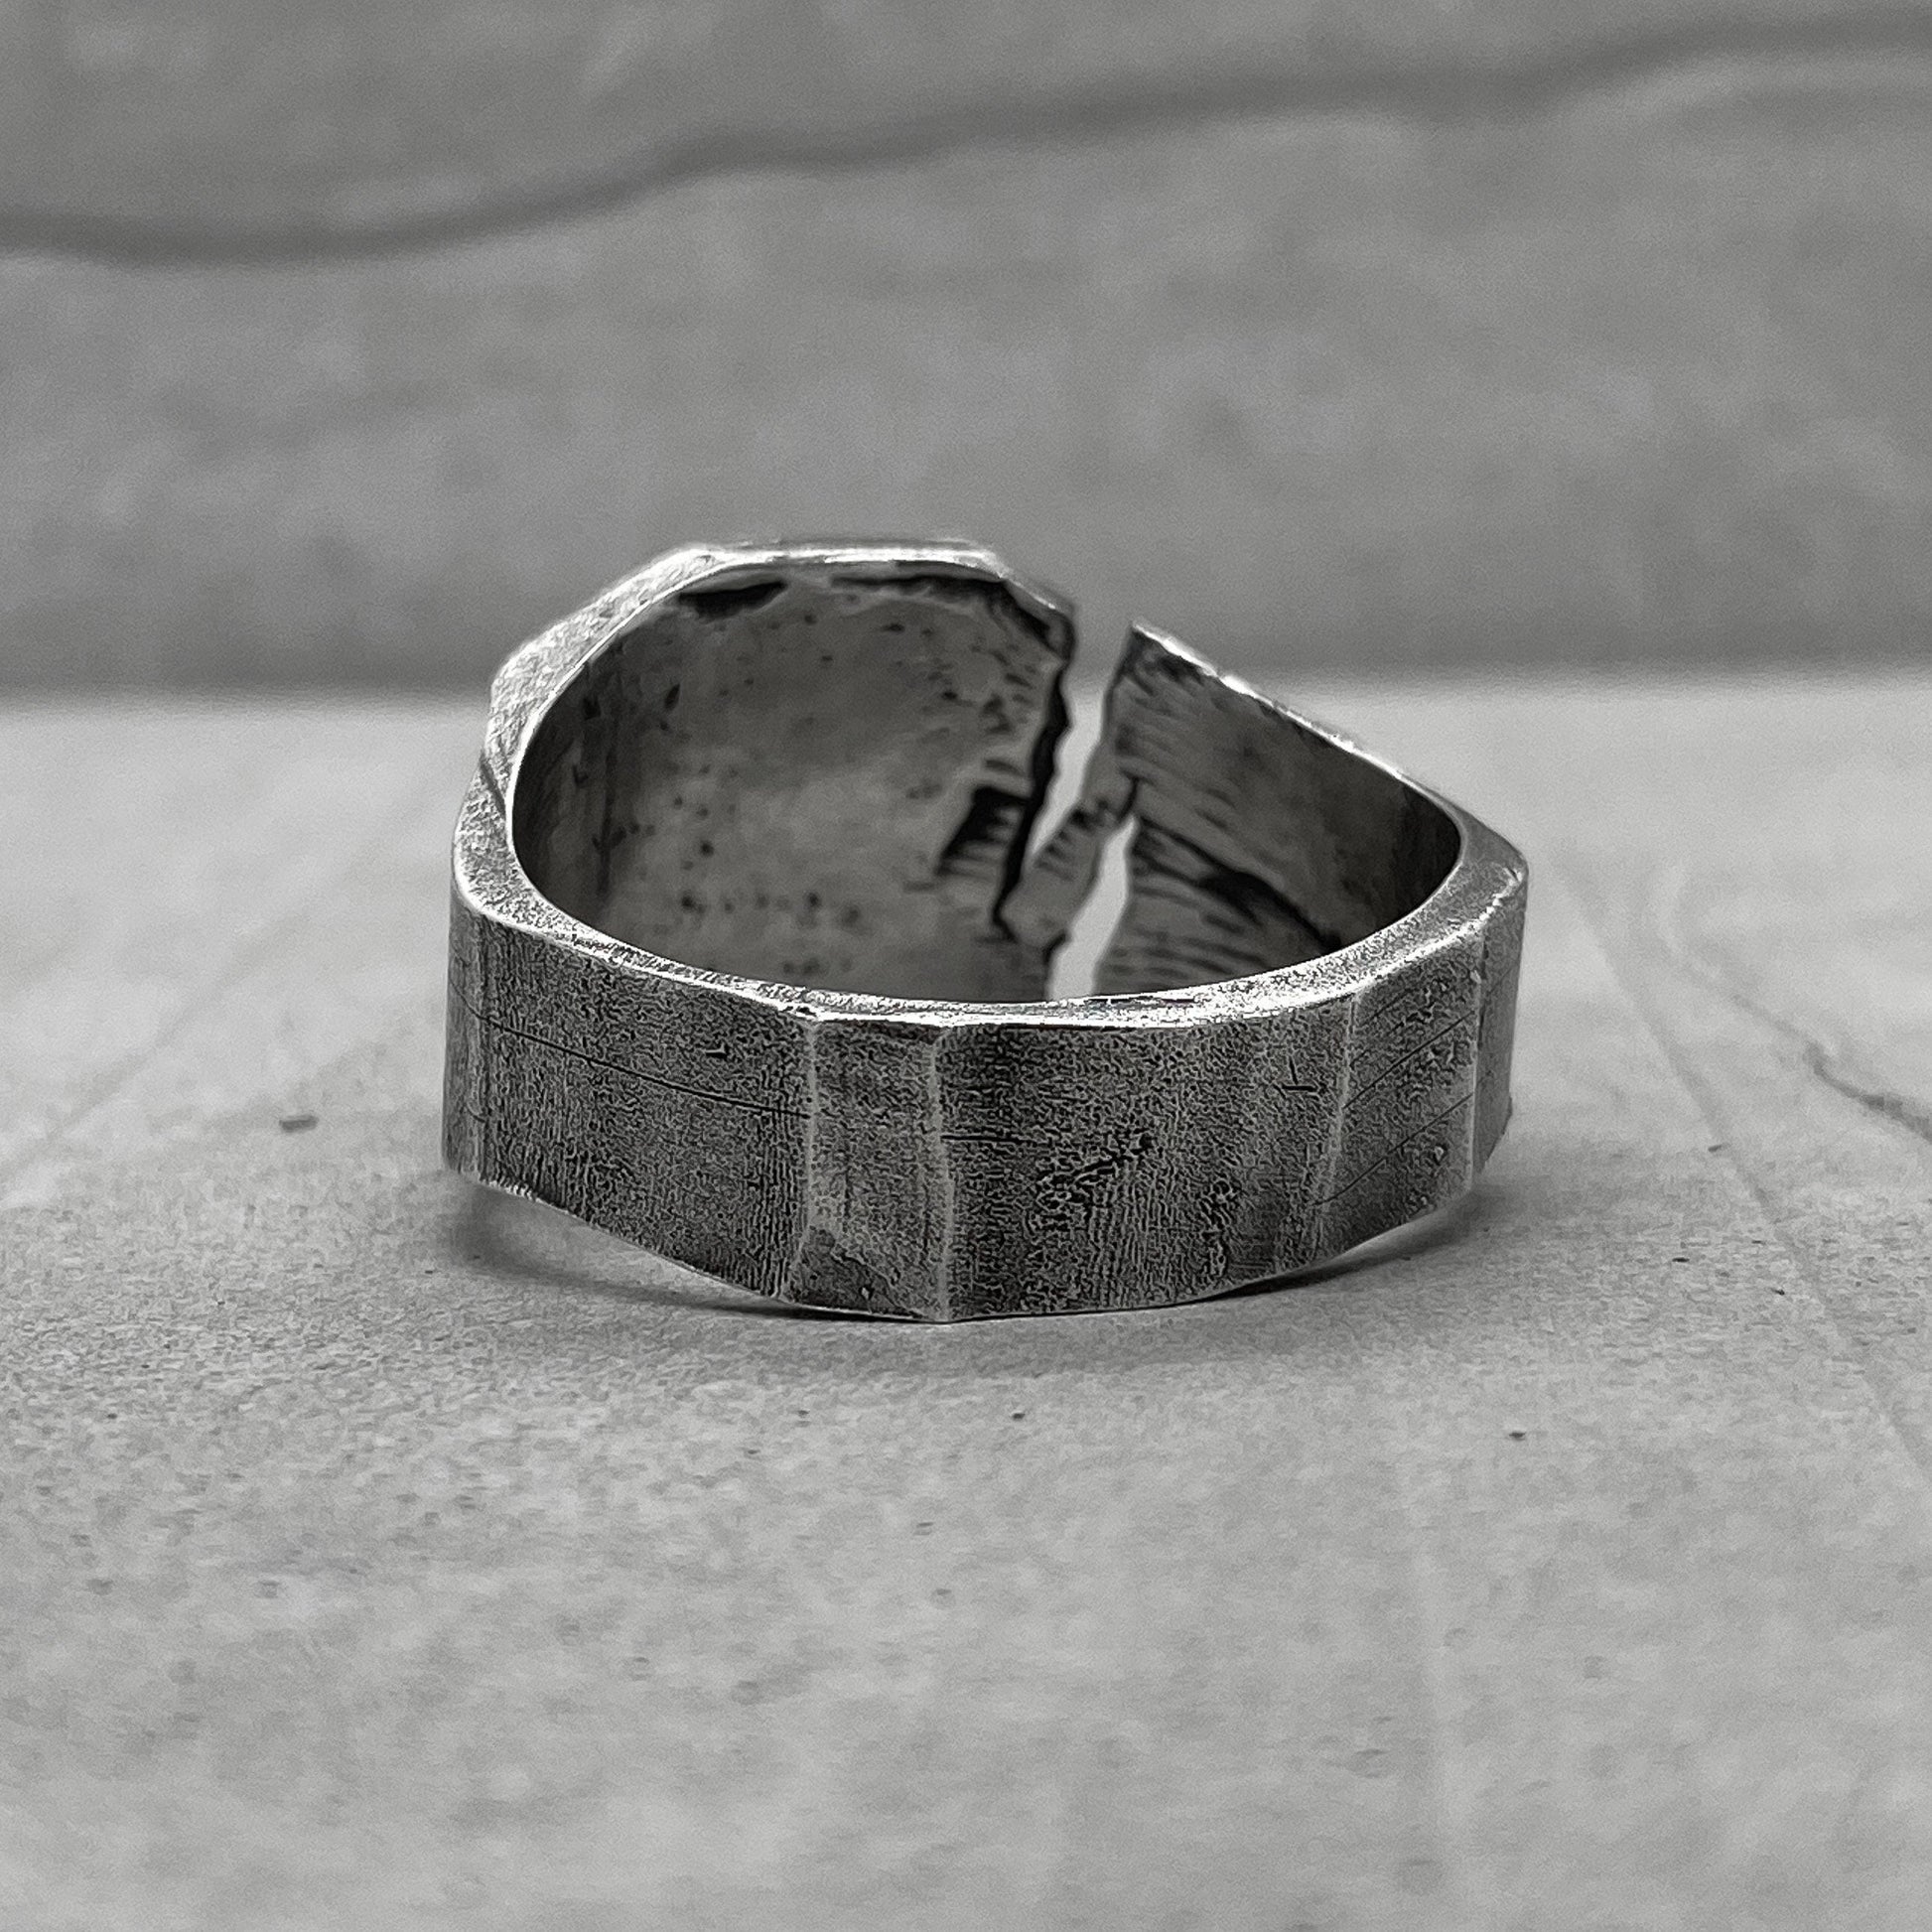 Rupture ring - a massive ring with an unusual texture of stretching and tearing Unusual ring Project50g 